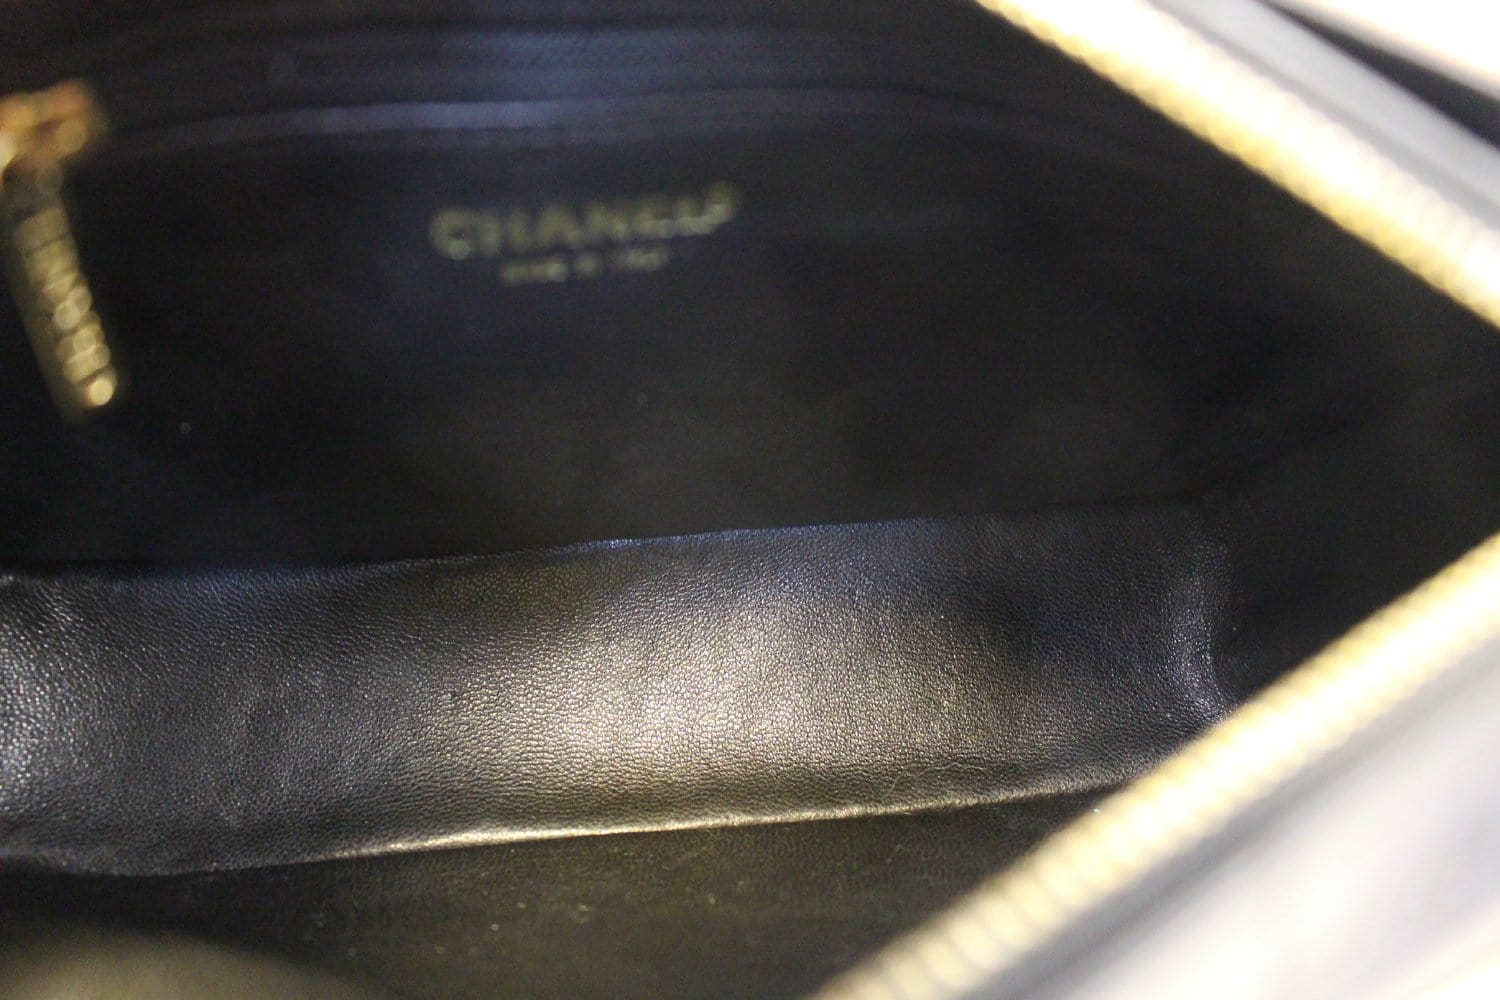 Vintage Chanel Bags, Pre-owned Chanel Bags